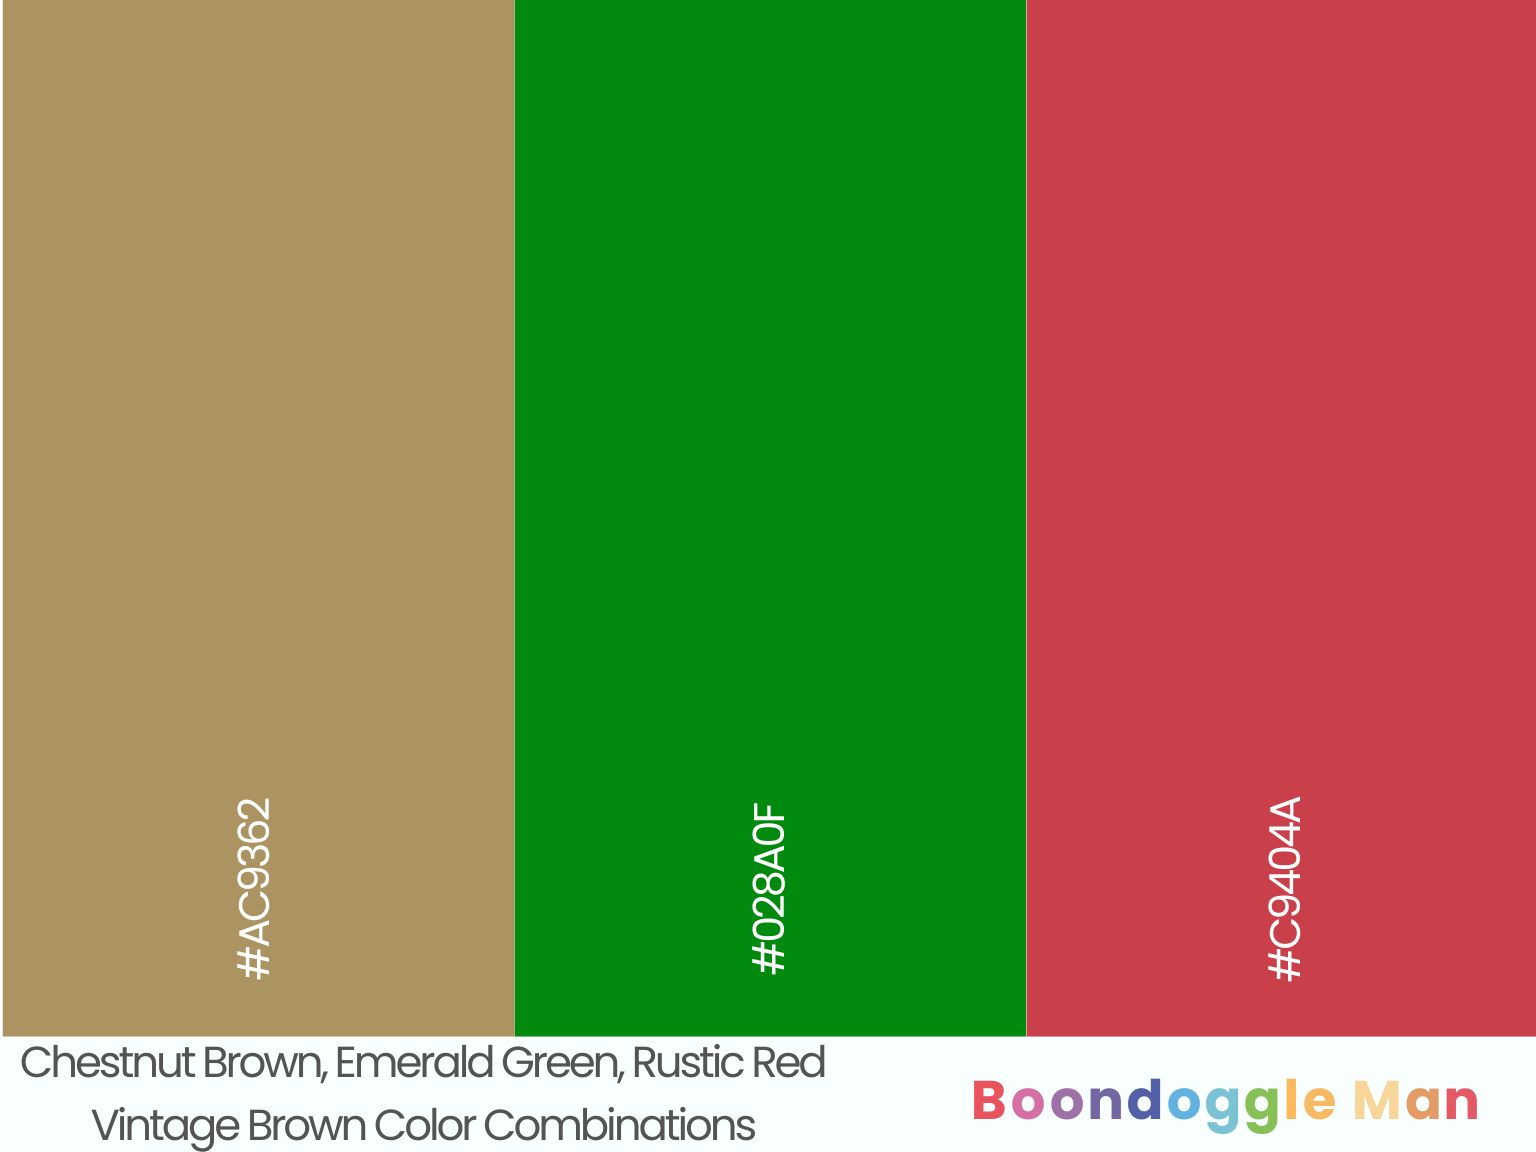 Chestnut Brown, Emerald Green, Rustic Red